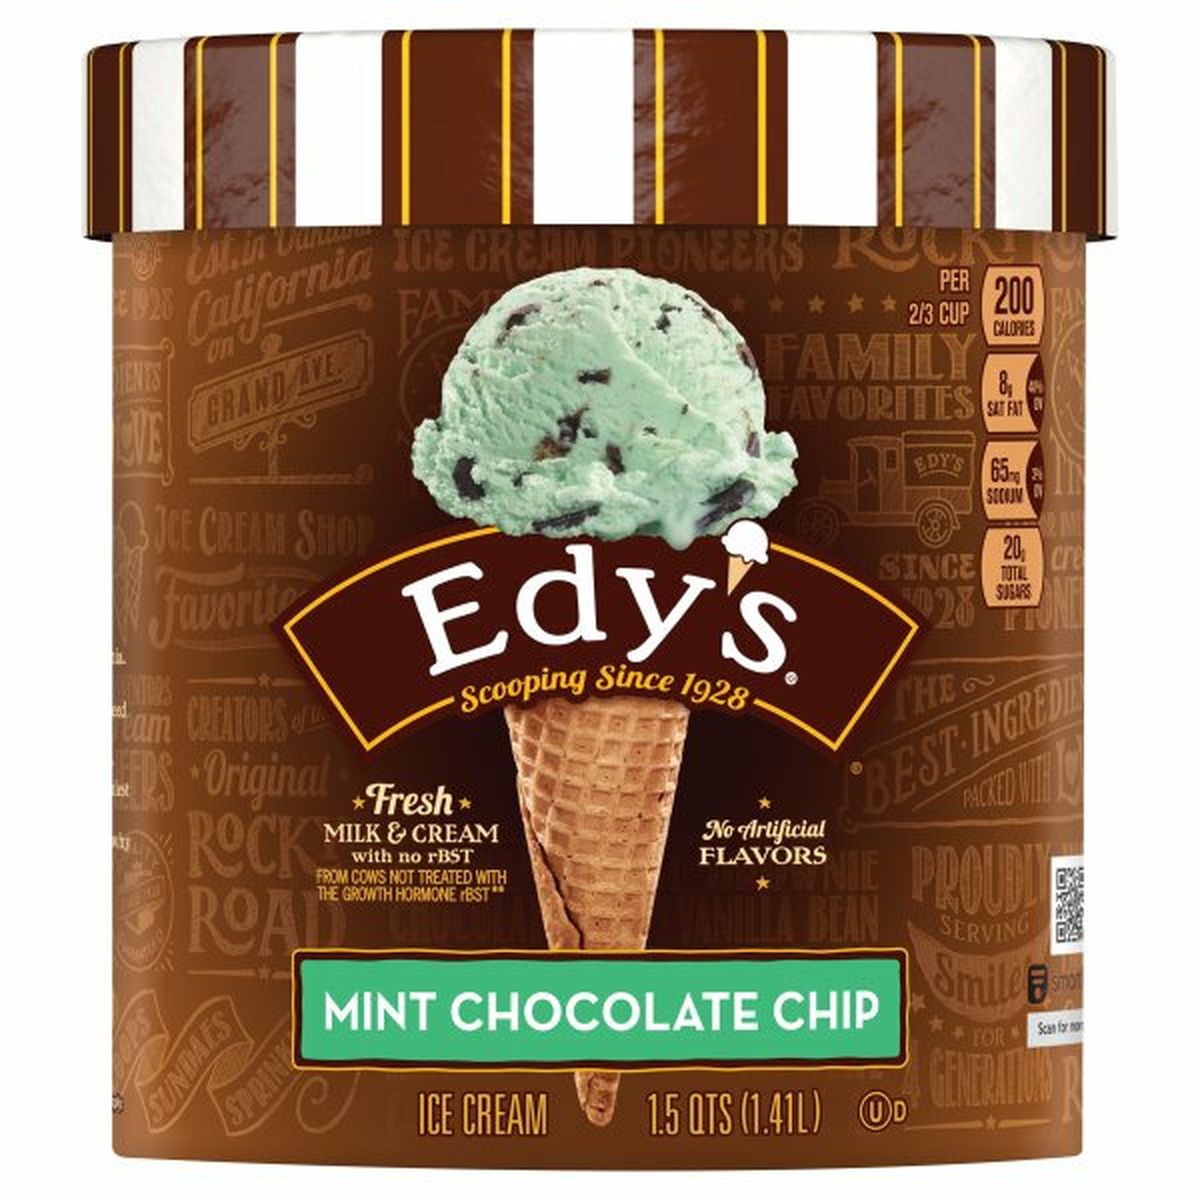 Calories in Edy's/Dreyer's Ice Cream, Mint Chocolate Chip